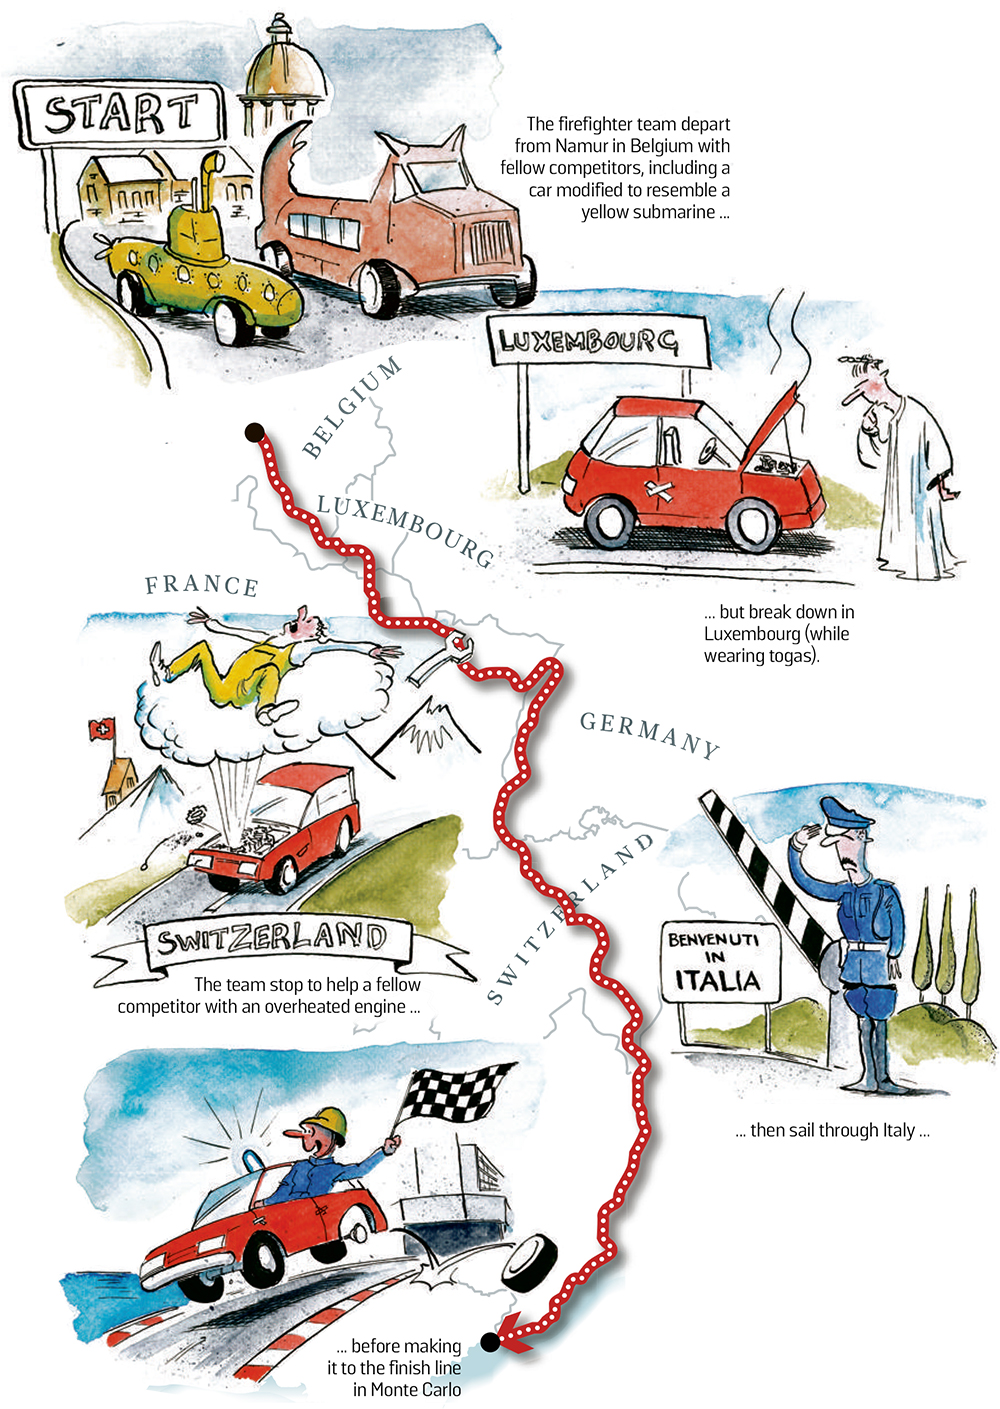 Monte Carlo or Bust rally route cartoon